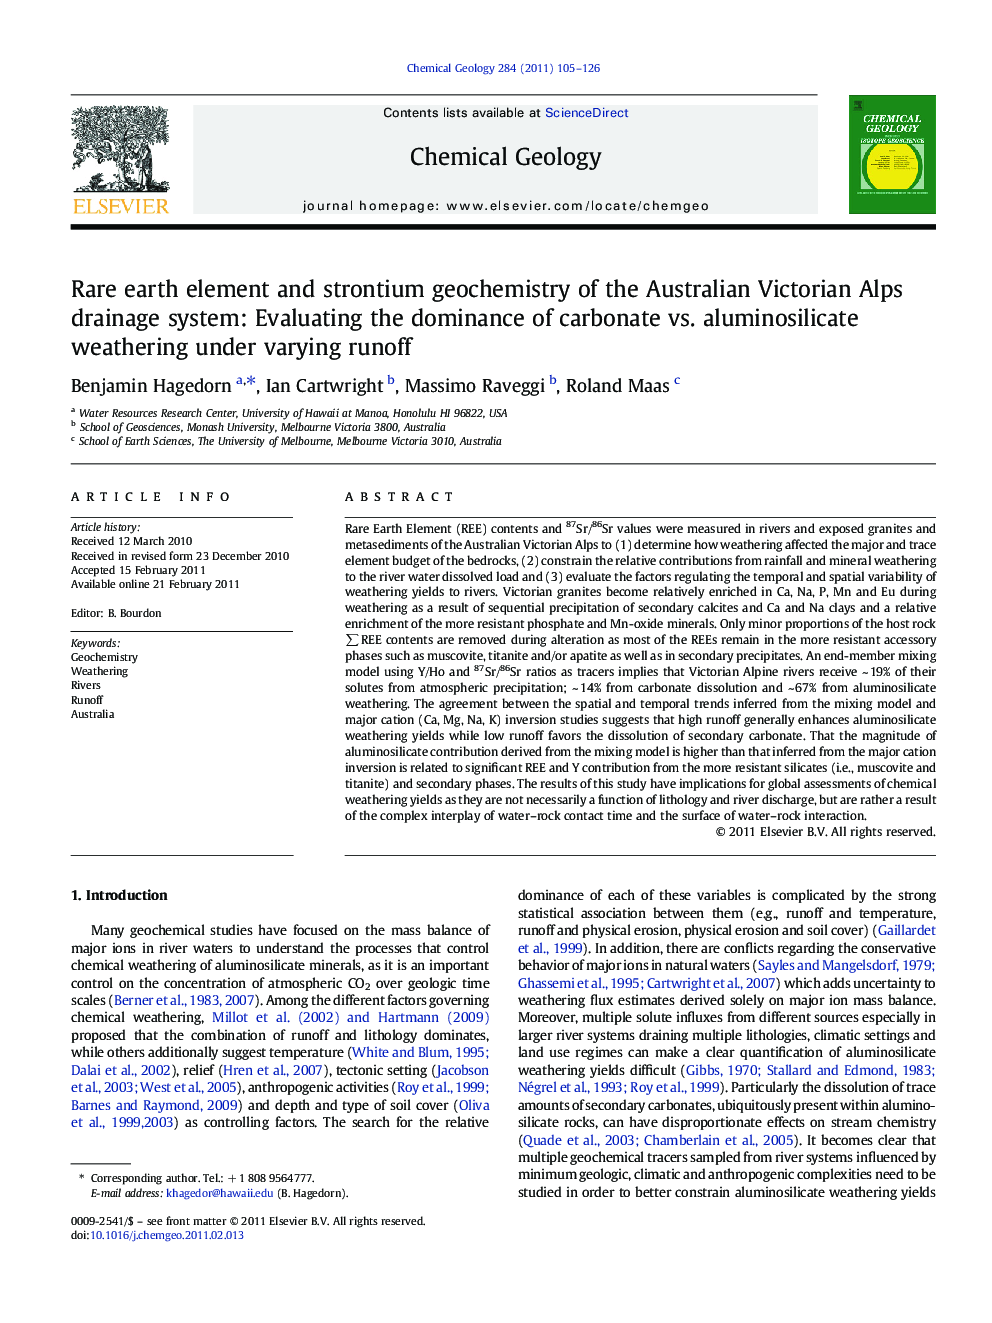 Rare earth element and strontium geochemistry of the Australian Victorian Alps drainage system: Evaluating the dominance of carbonate vs. aluminosilicate weathering under varying runoff